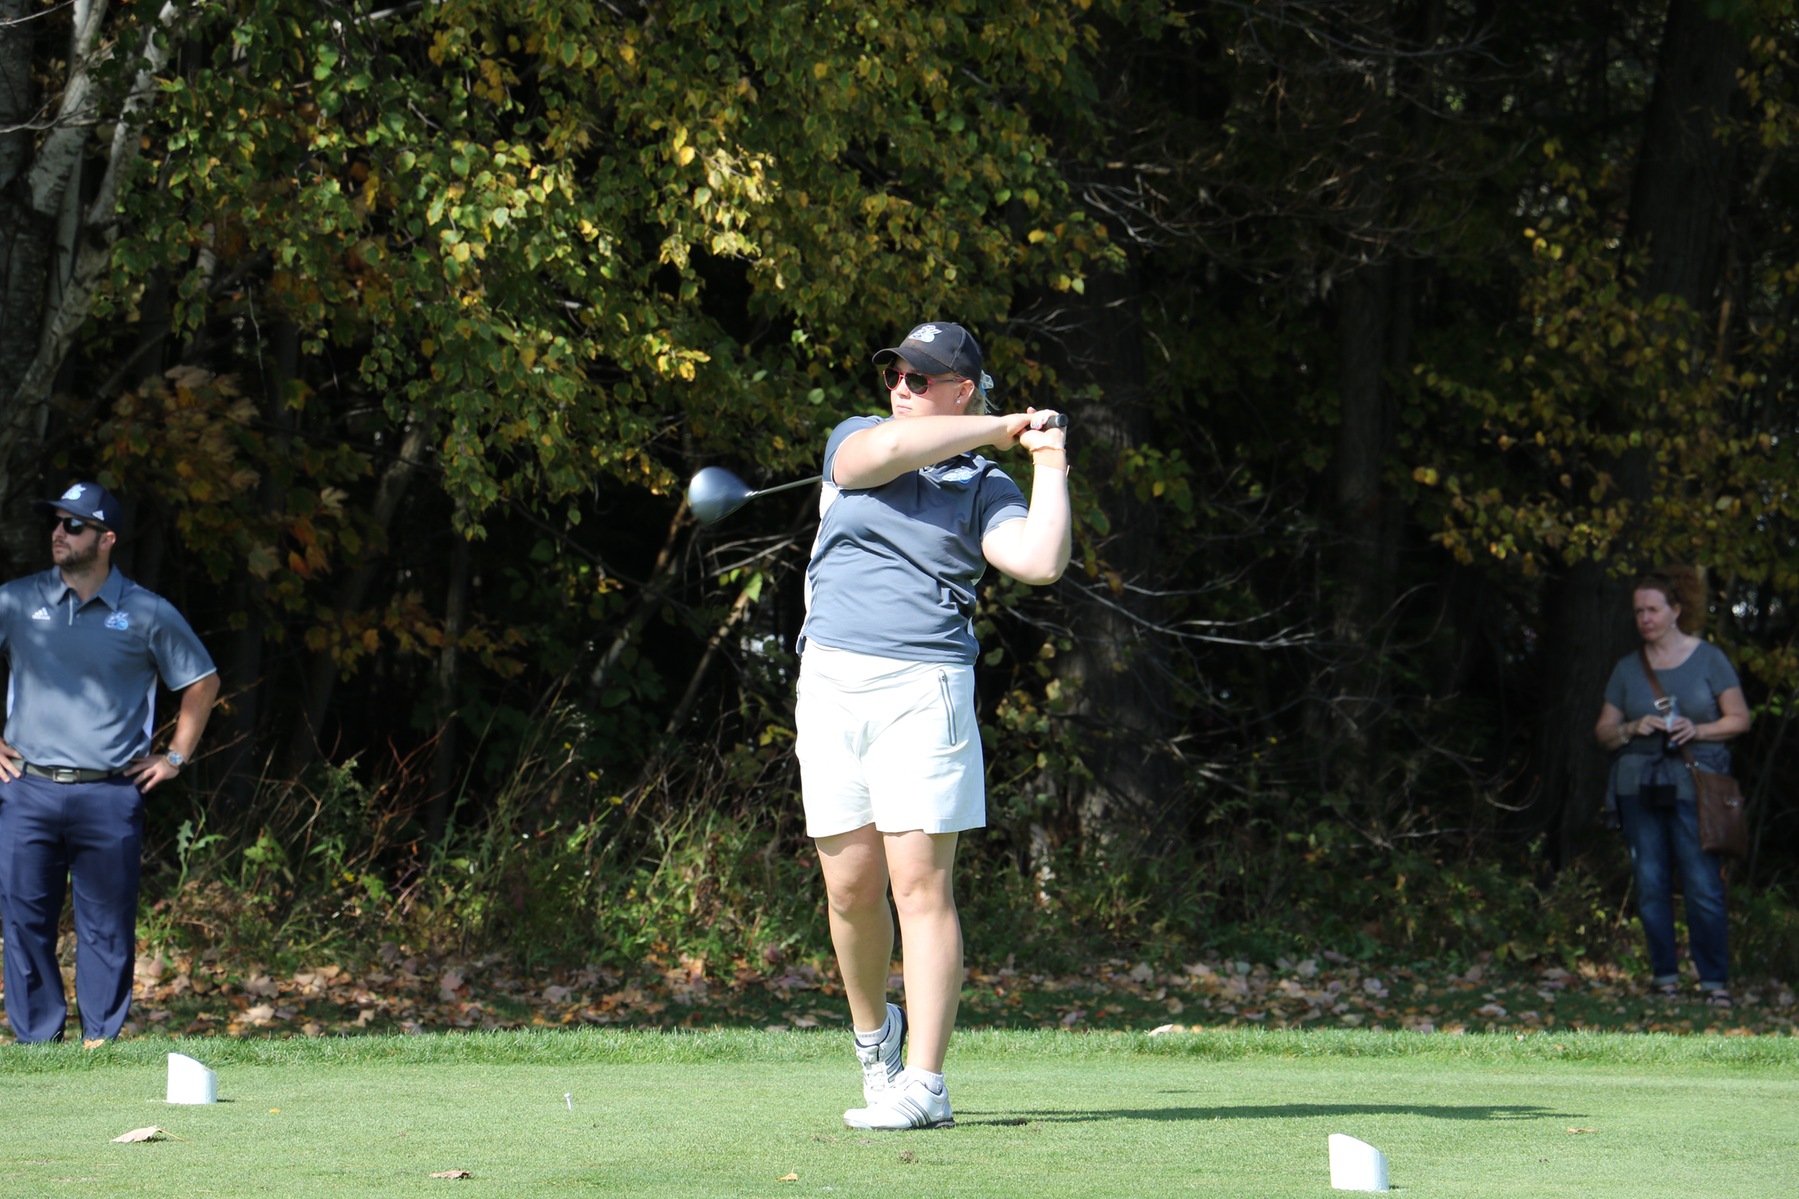 Men's and Women's Golf Announce Tryout Information